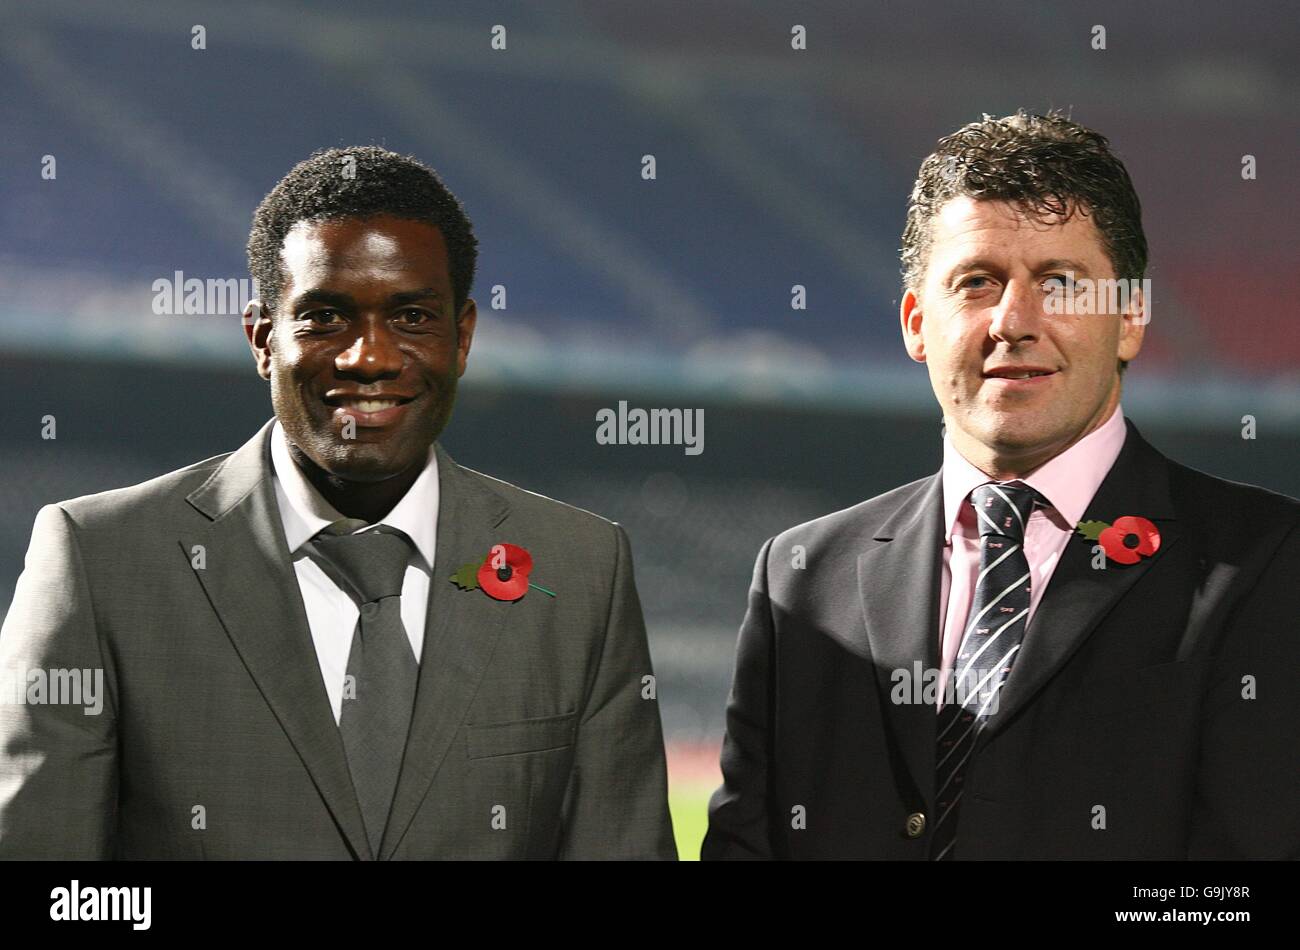 Soccer - UEFA Champions League - Group A - Barcelona v Chelsea - Nou Camp. ITV's Robbie Earle (l) and Andy Townsend (r) Stock Photo